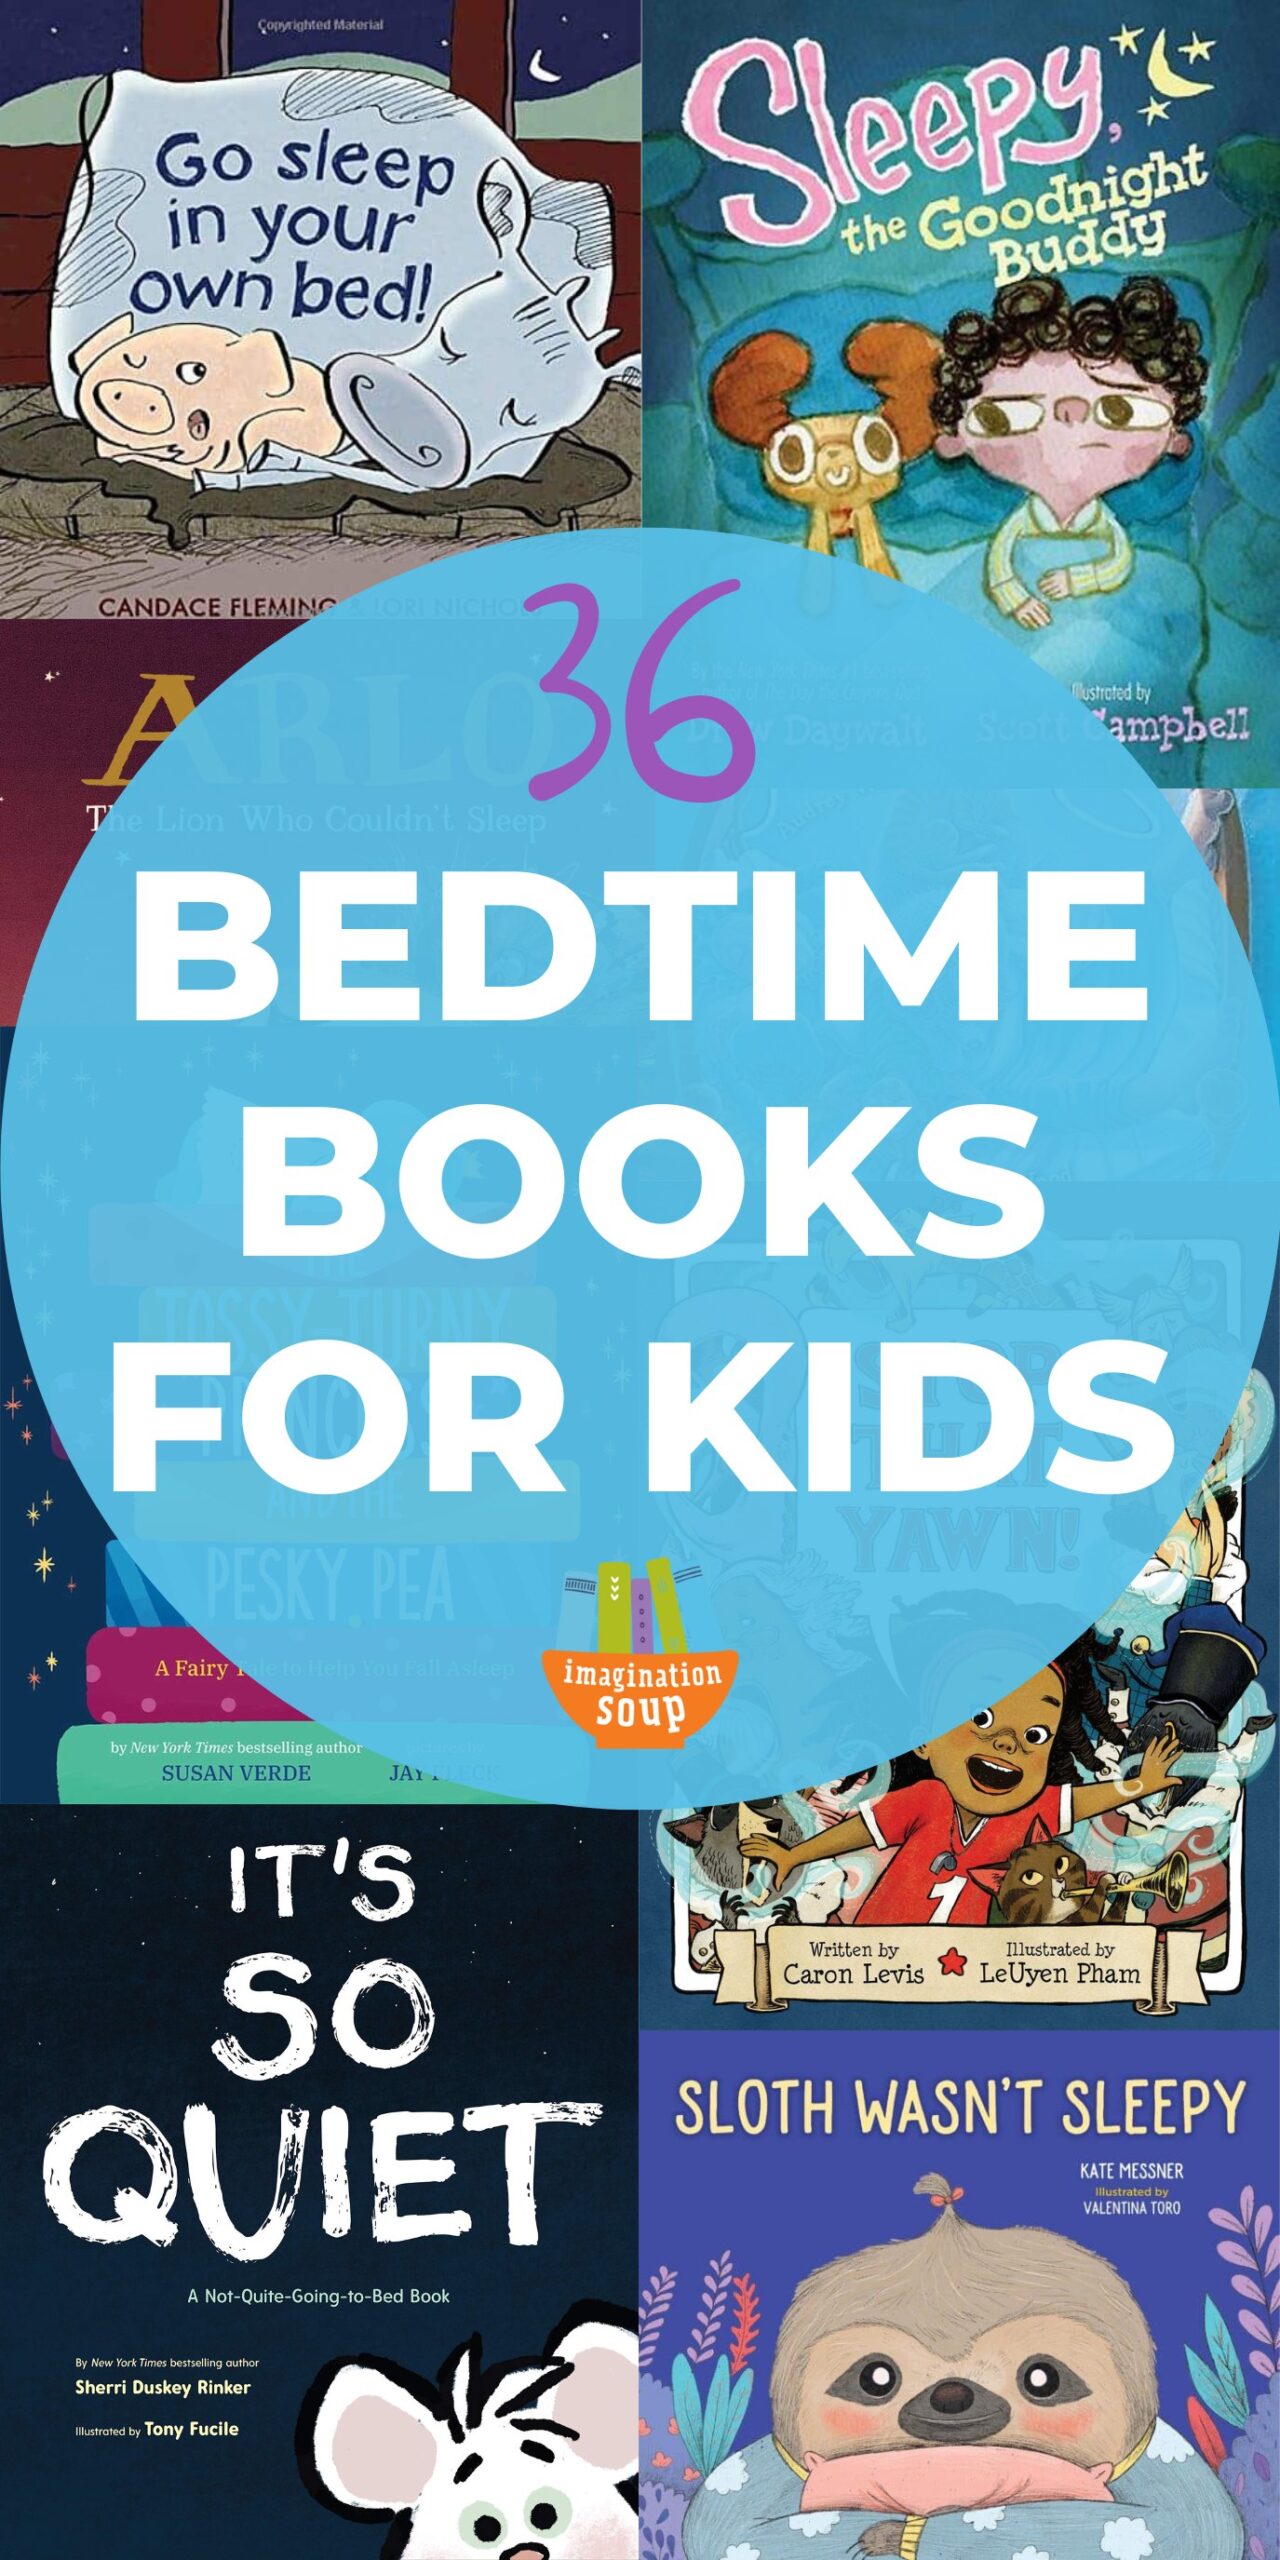 Looking for good bedtime stories for kids? I'm a huge advocate of reading bedtime stories to kids. Today, I want to share the best stories for kids that are actually ABOUT bedtime and sleeping!!